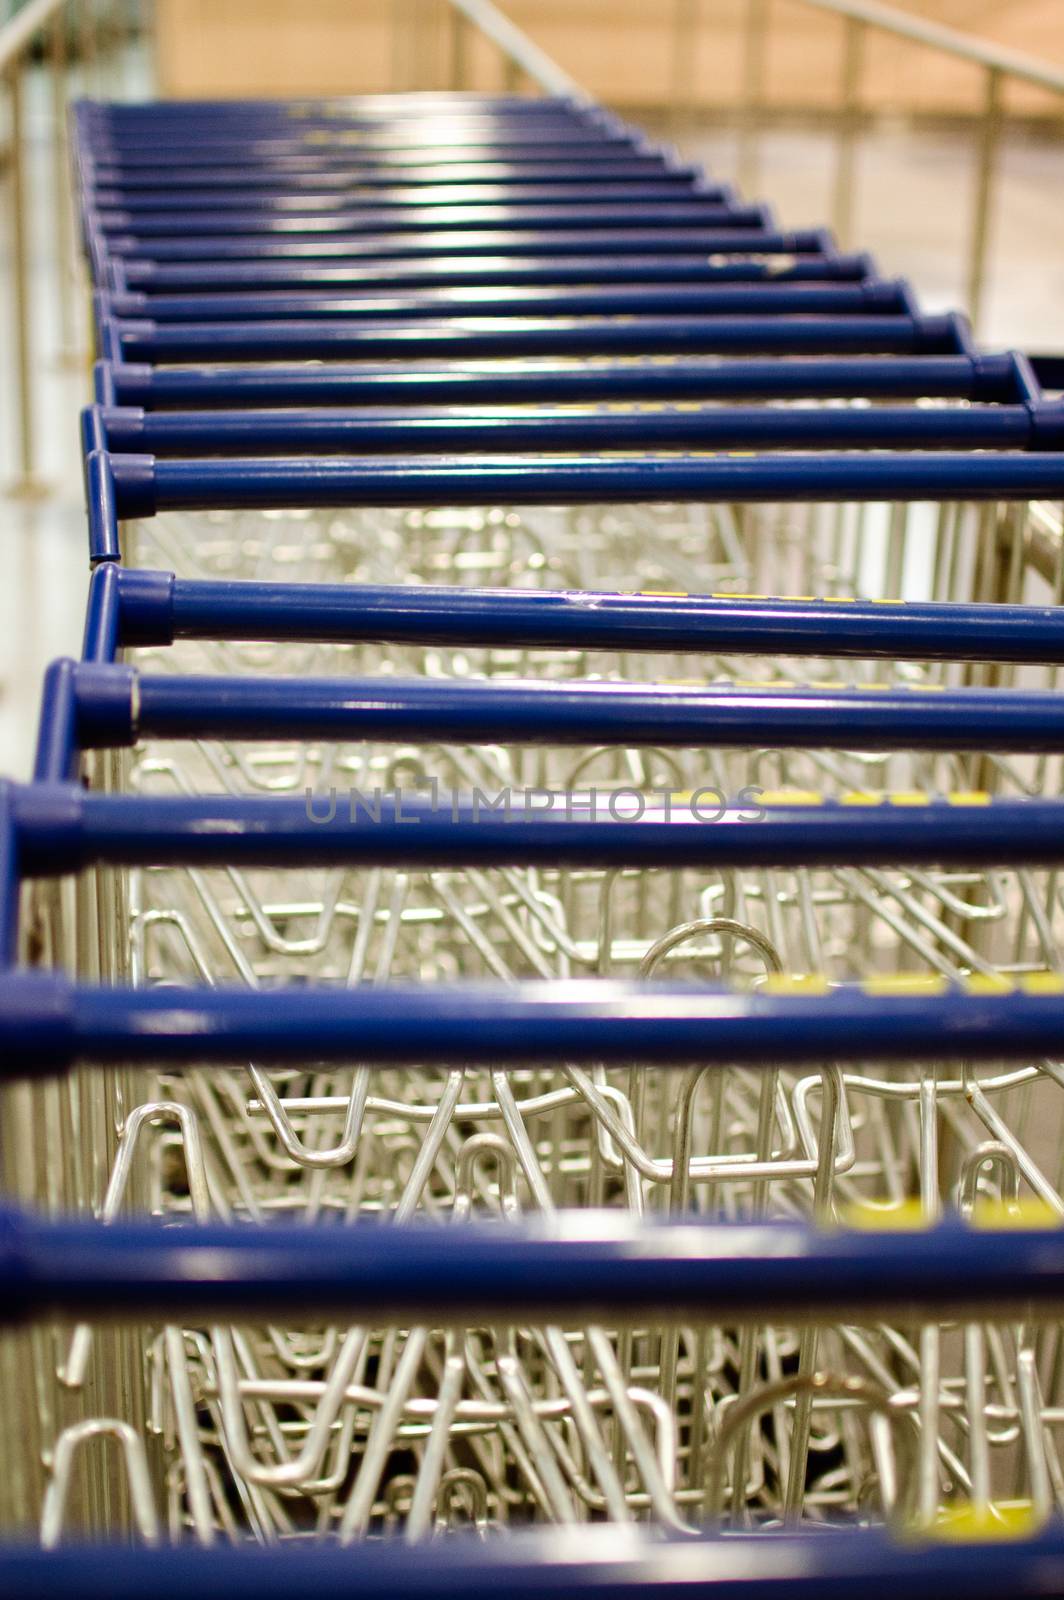 Row of Shopping Carts in a Mall, Italy